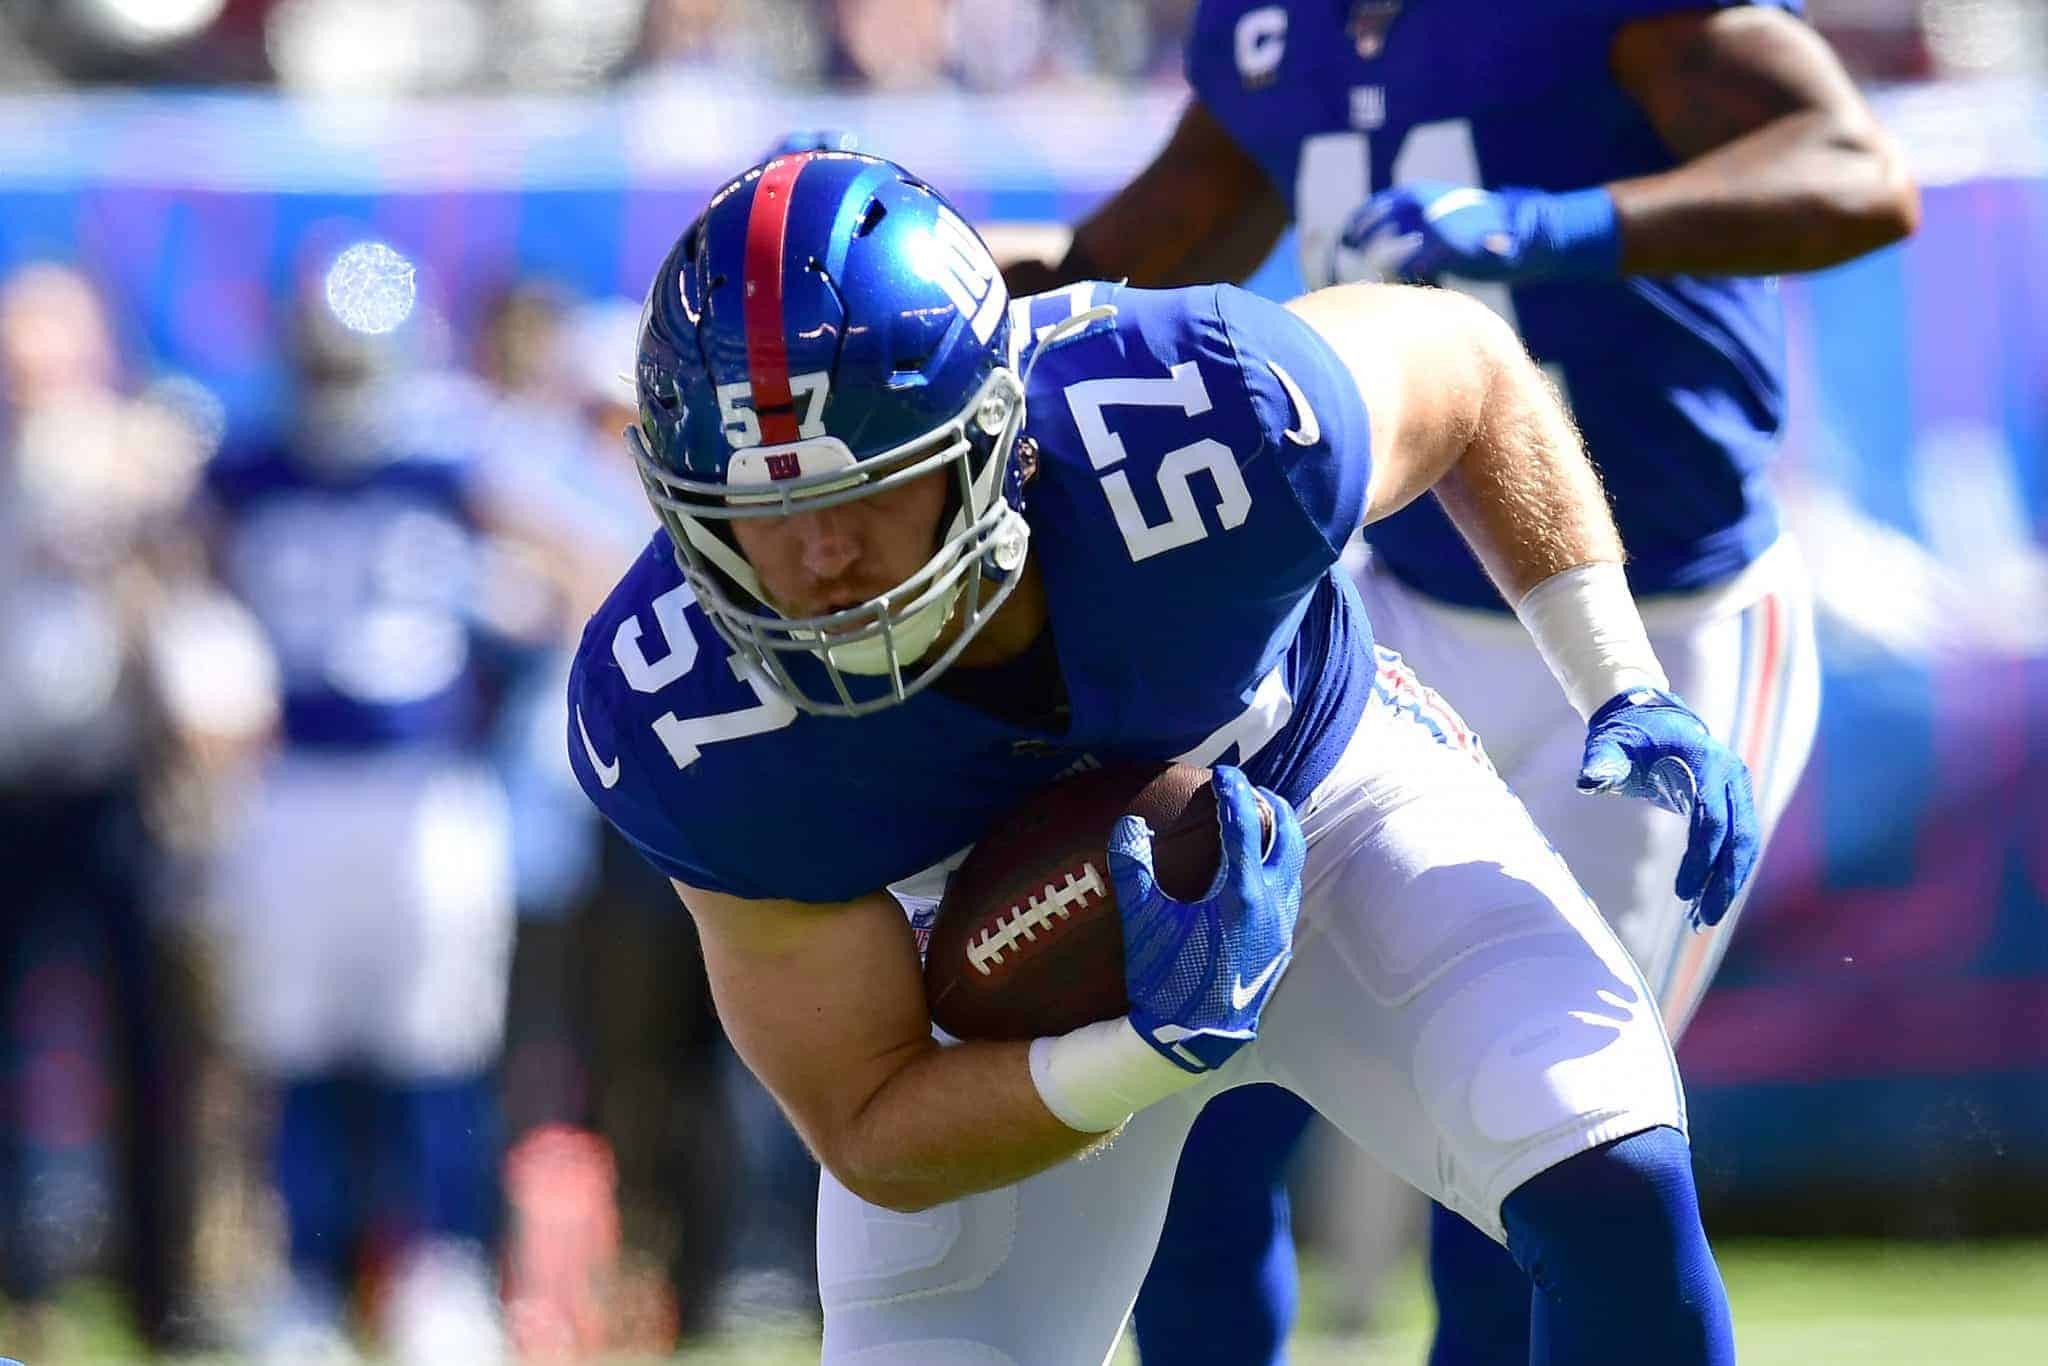 EAST RUTHERFORD, NEW JERSEY - SEPTEMBER 29: Ryan Connelly #57 of the New York Giants carries the ball during their game against the Washington Redskins at MetLife Stadium on September 29, 2019 in East Rutherford, New Jersey.